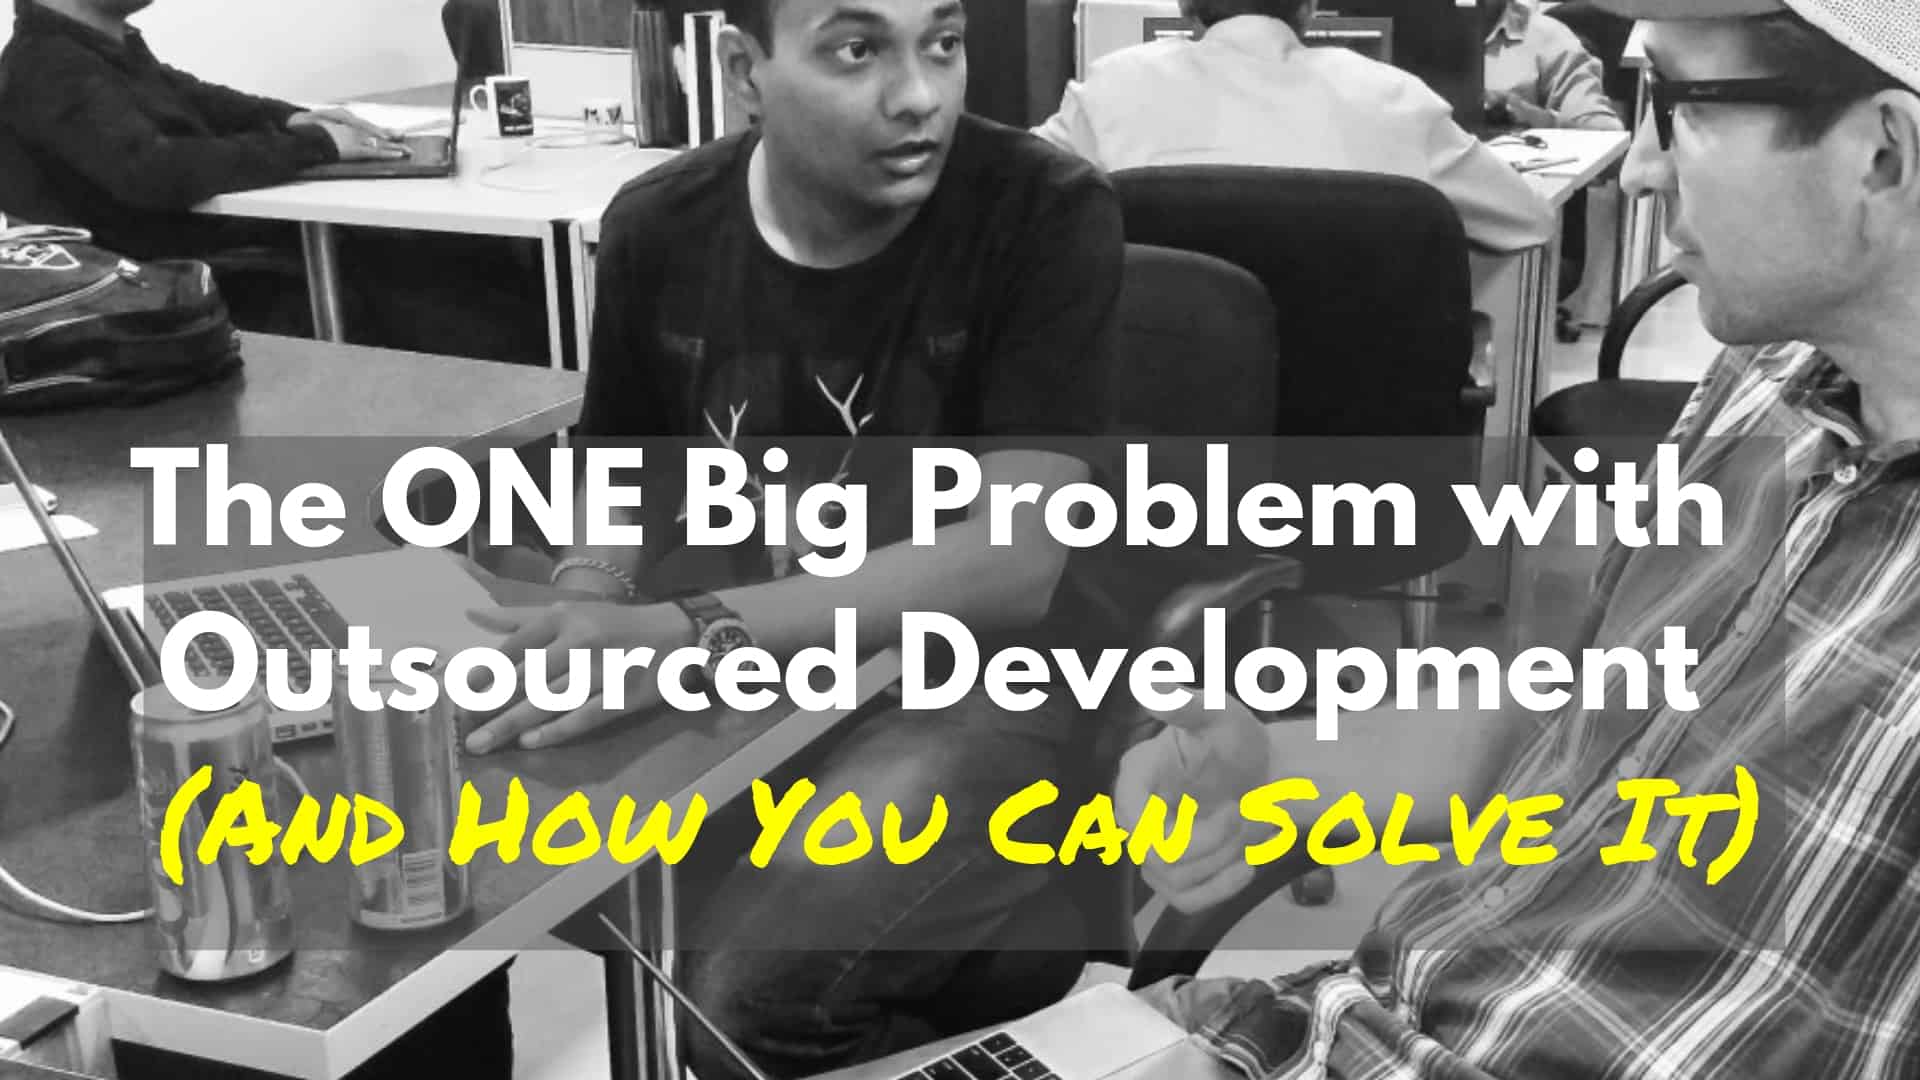 The ONE Big Challenge With Outsourced Development And How You Can Solve It